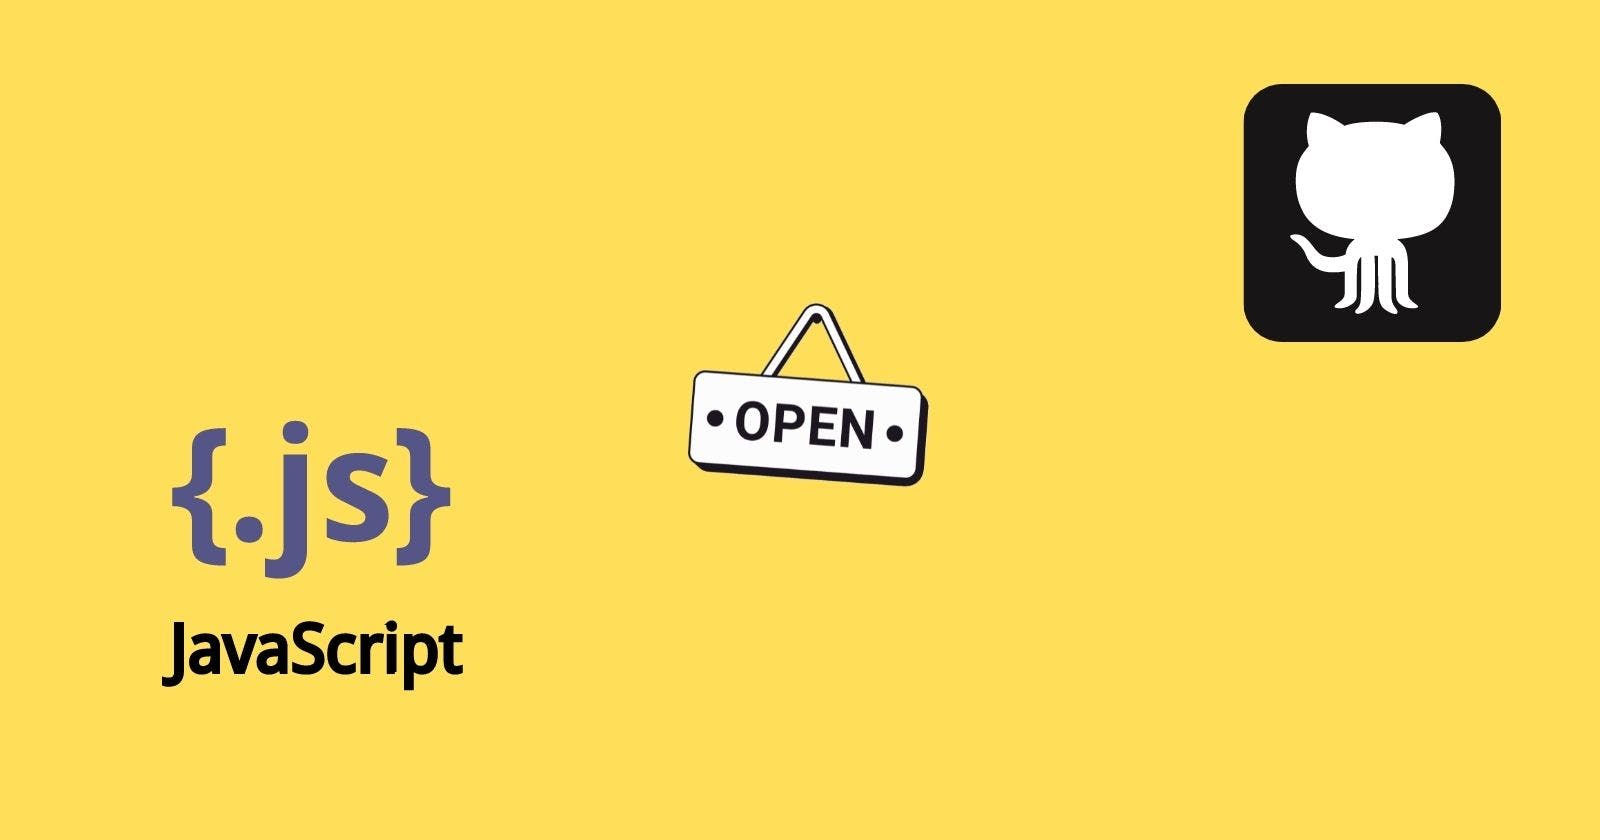 Top 6 opensource repositories to learn JavaScript in 2022